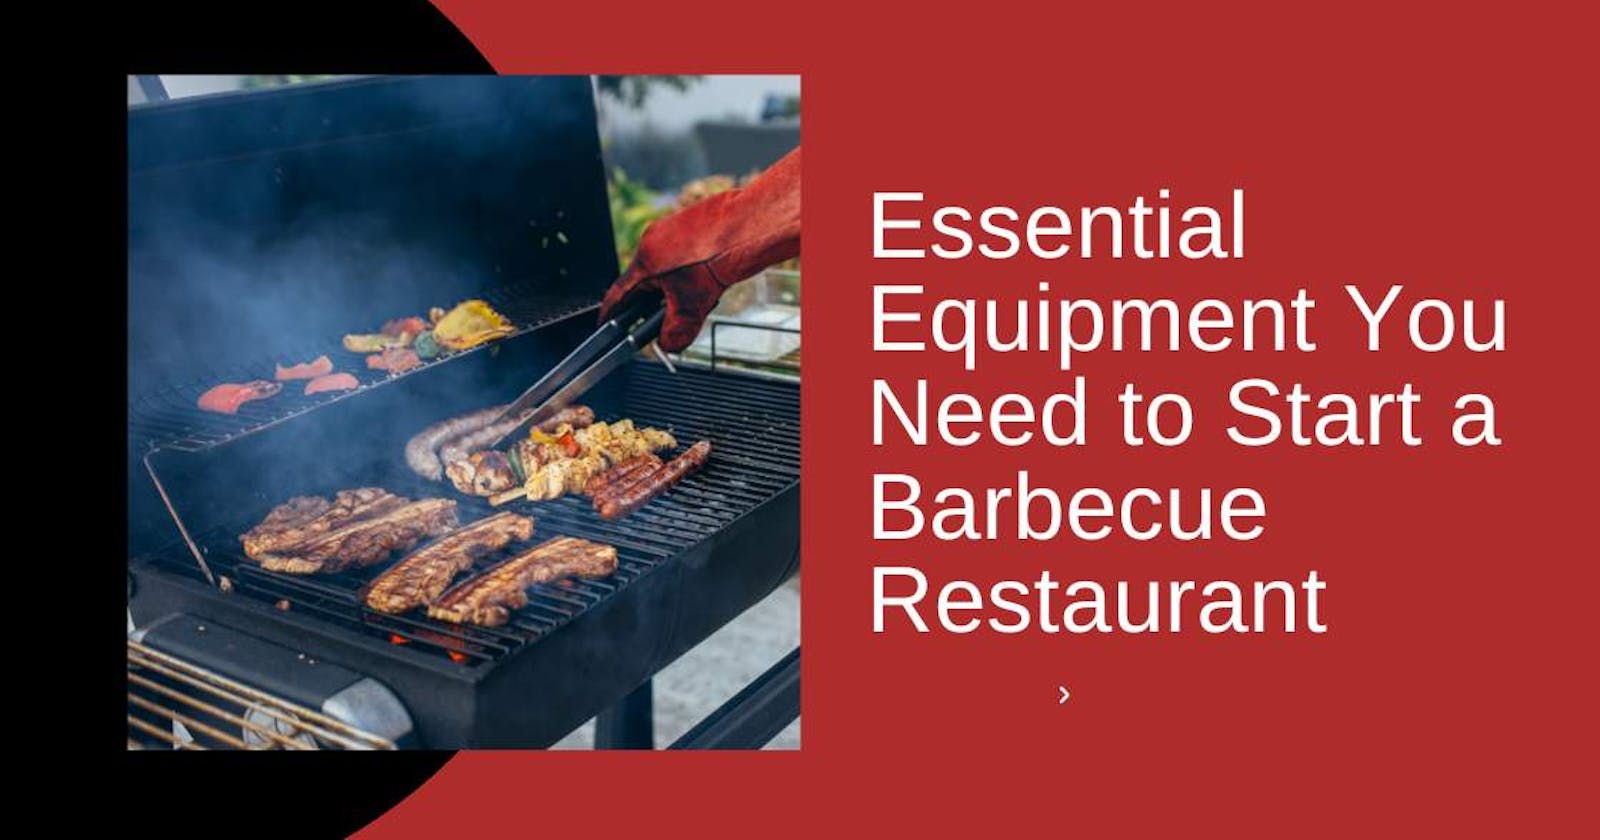 Essential Equipment You Need to Start a Barbecue Restaurant